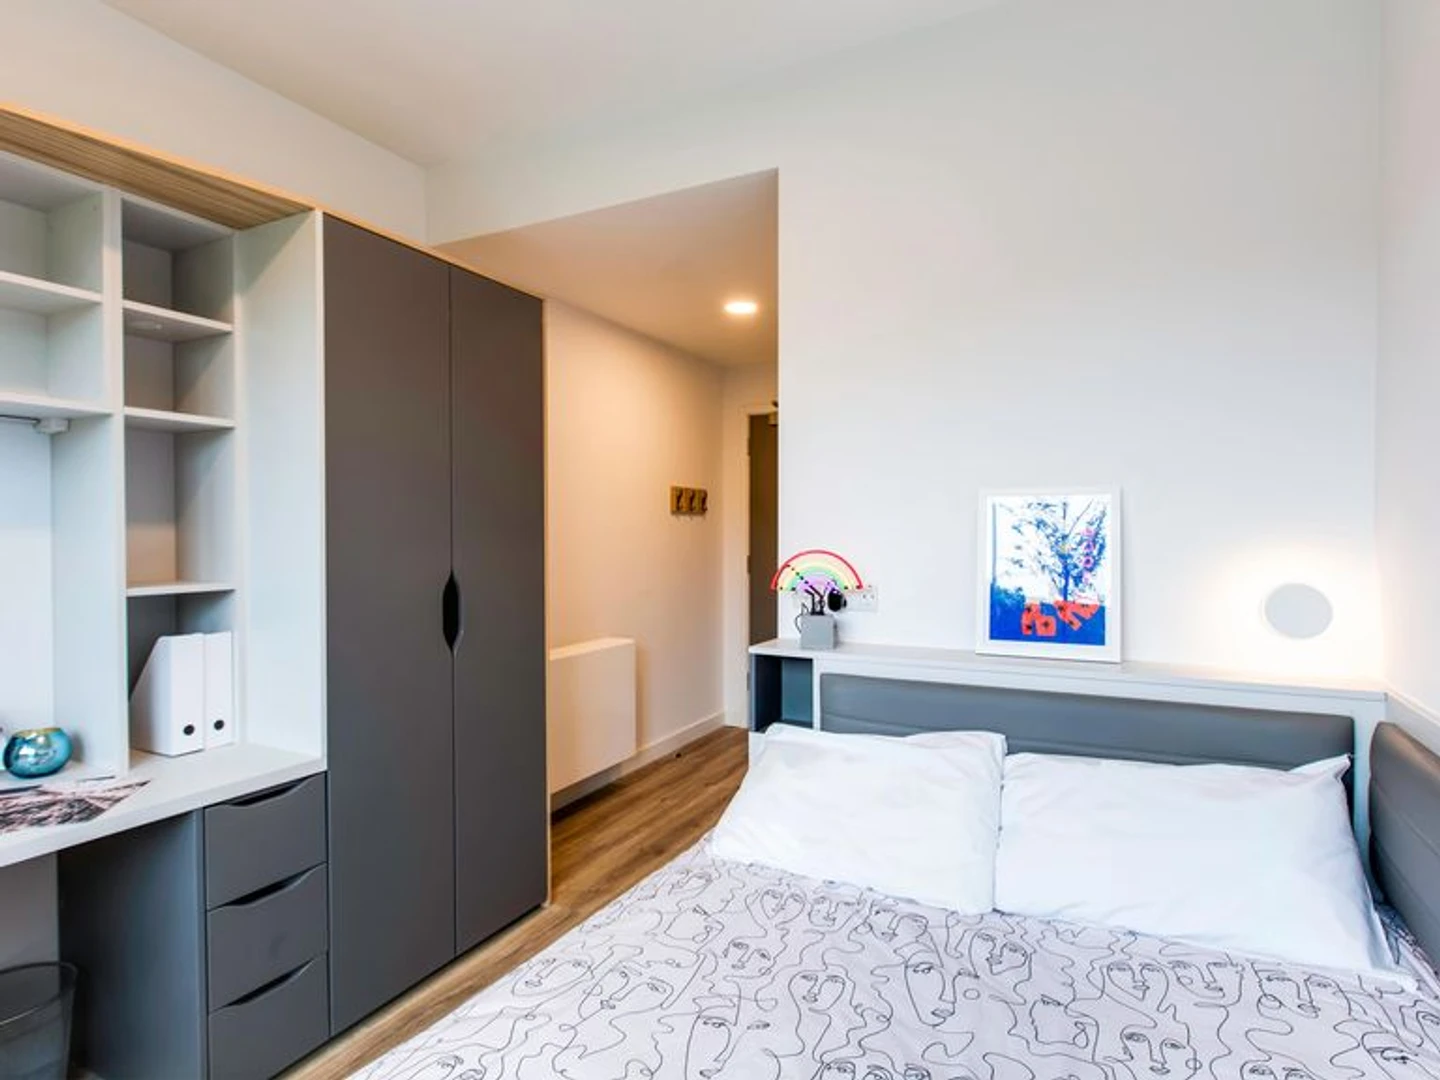 Renting rooms by the month in Dublin